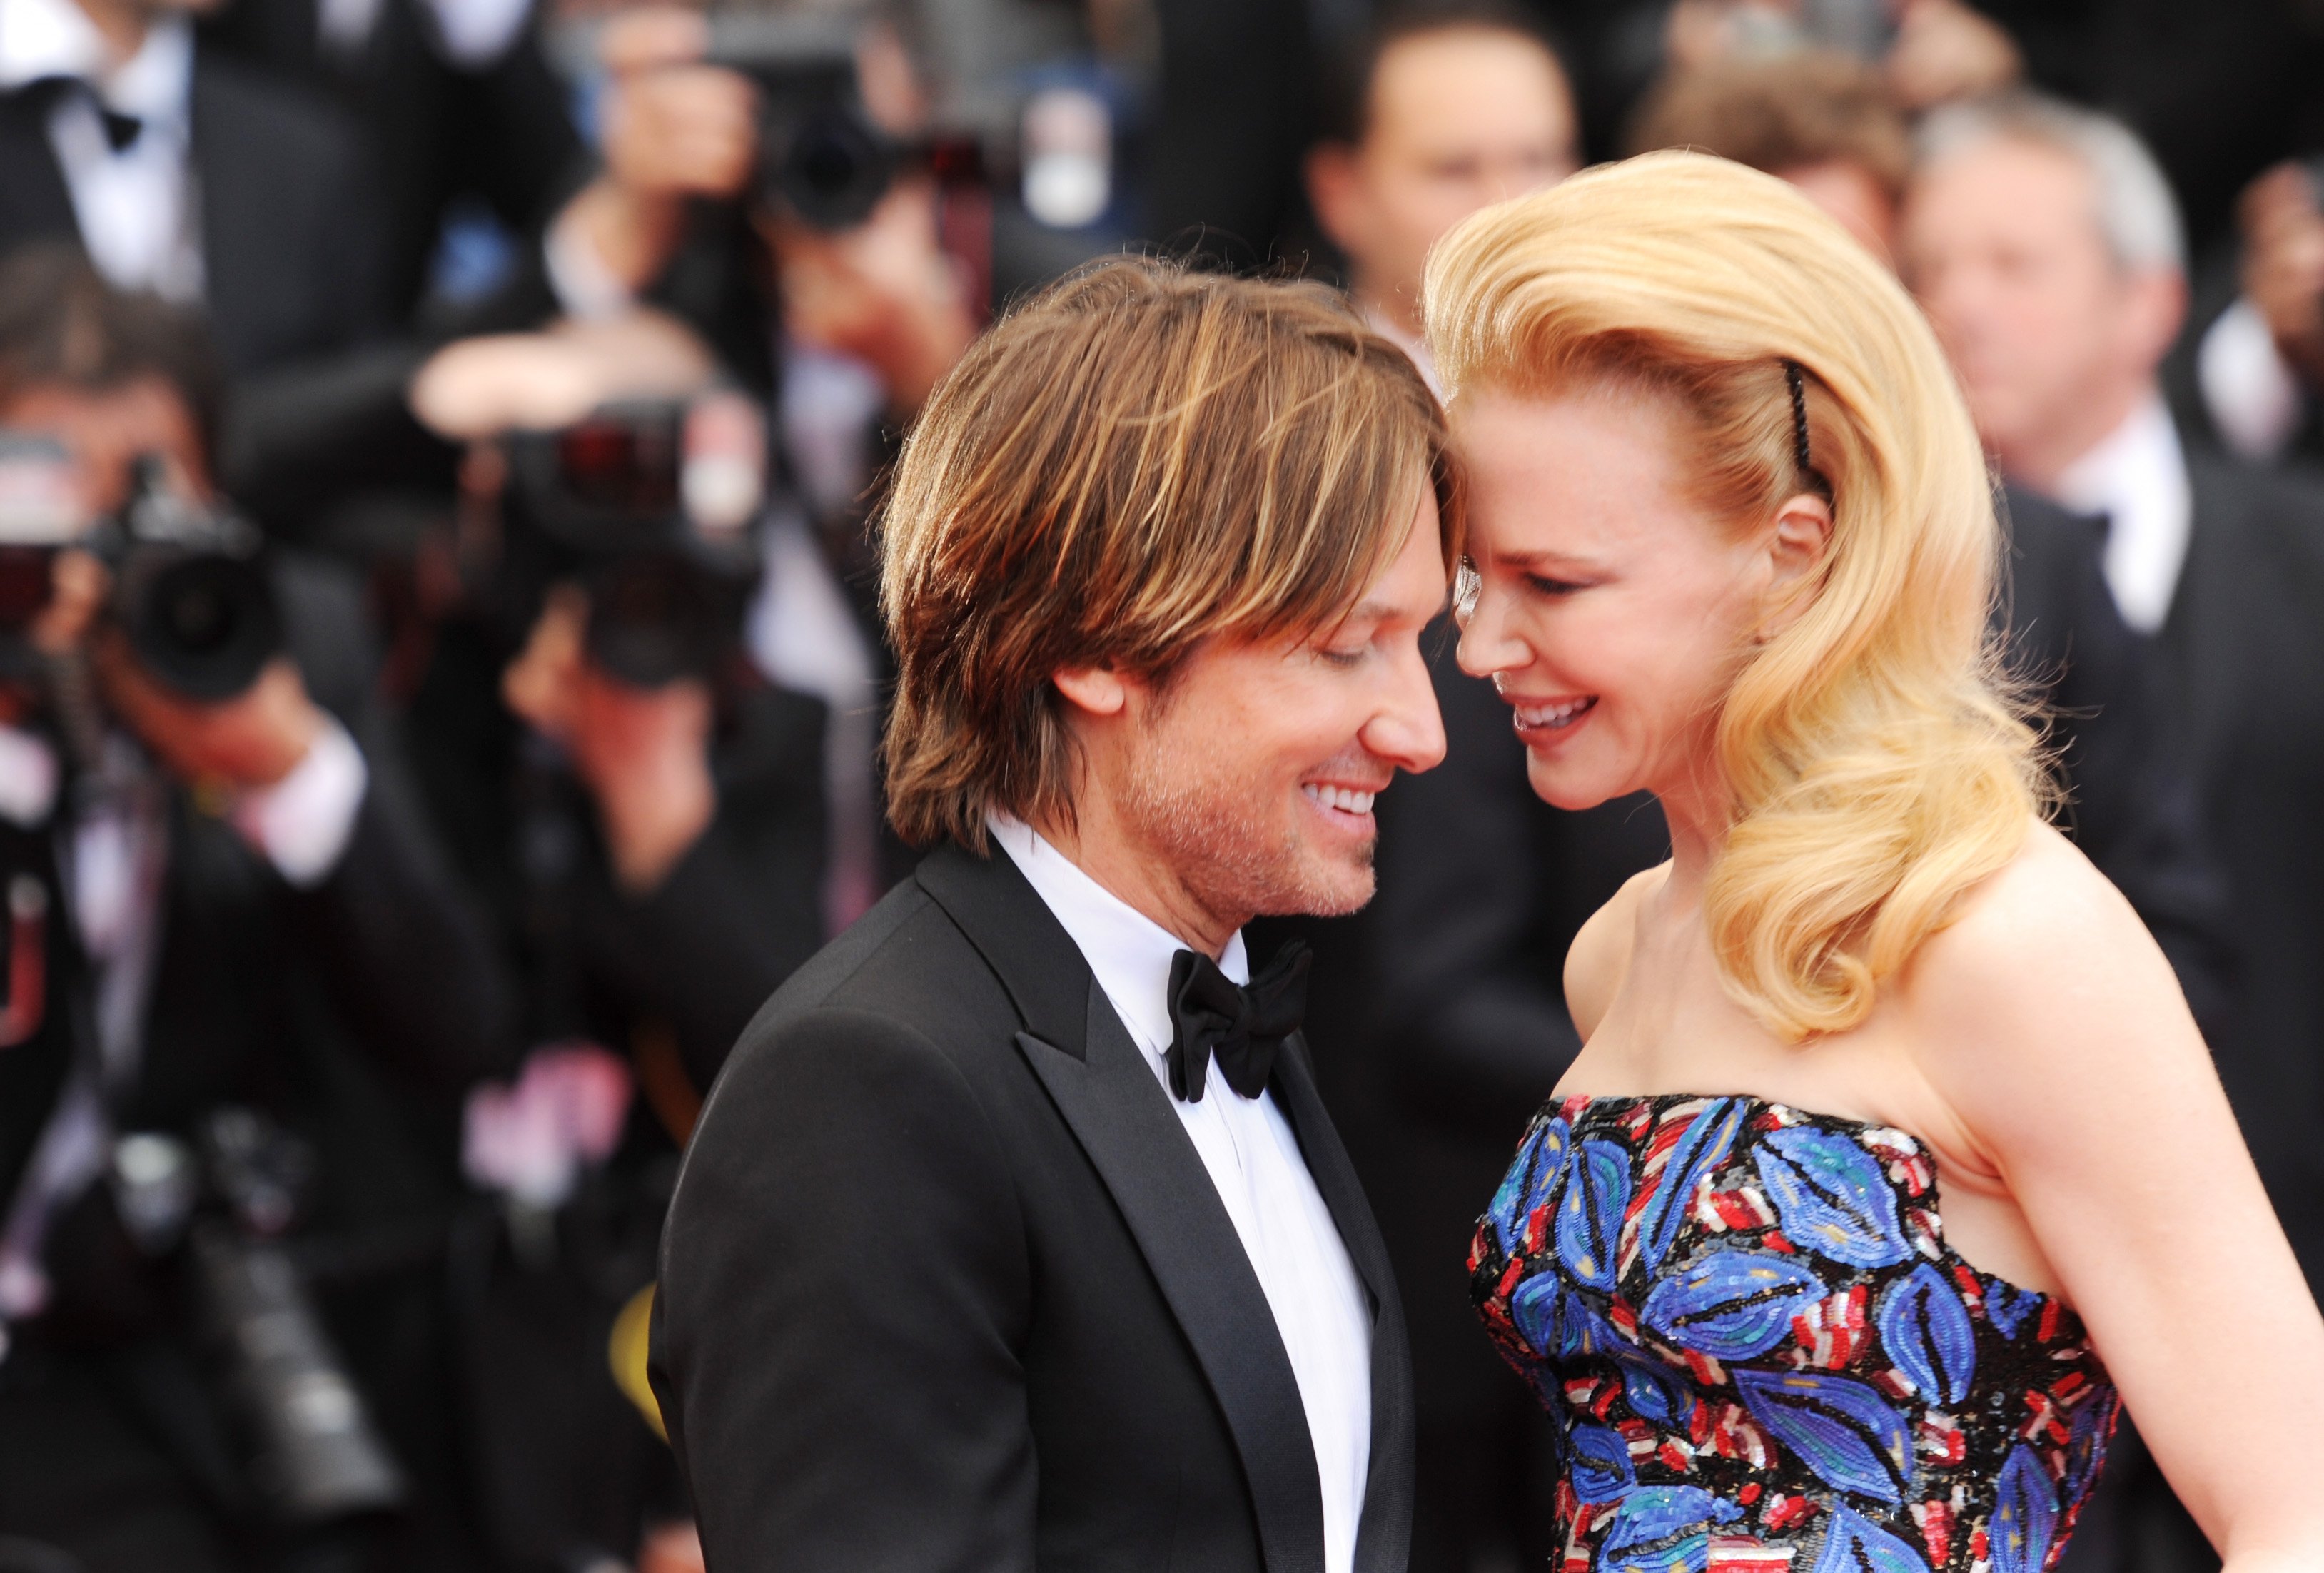 Keith Urban and Nicole Kidman on May 19, 2013 in Cannes, France | Photo: Getty Images